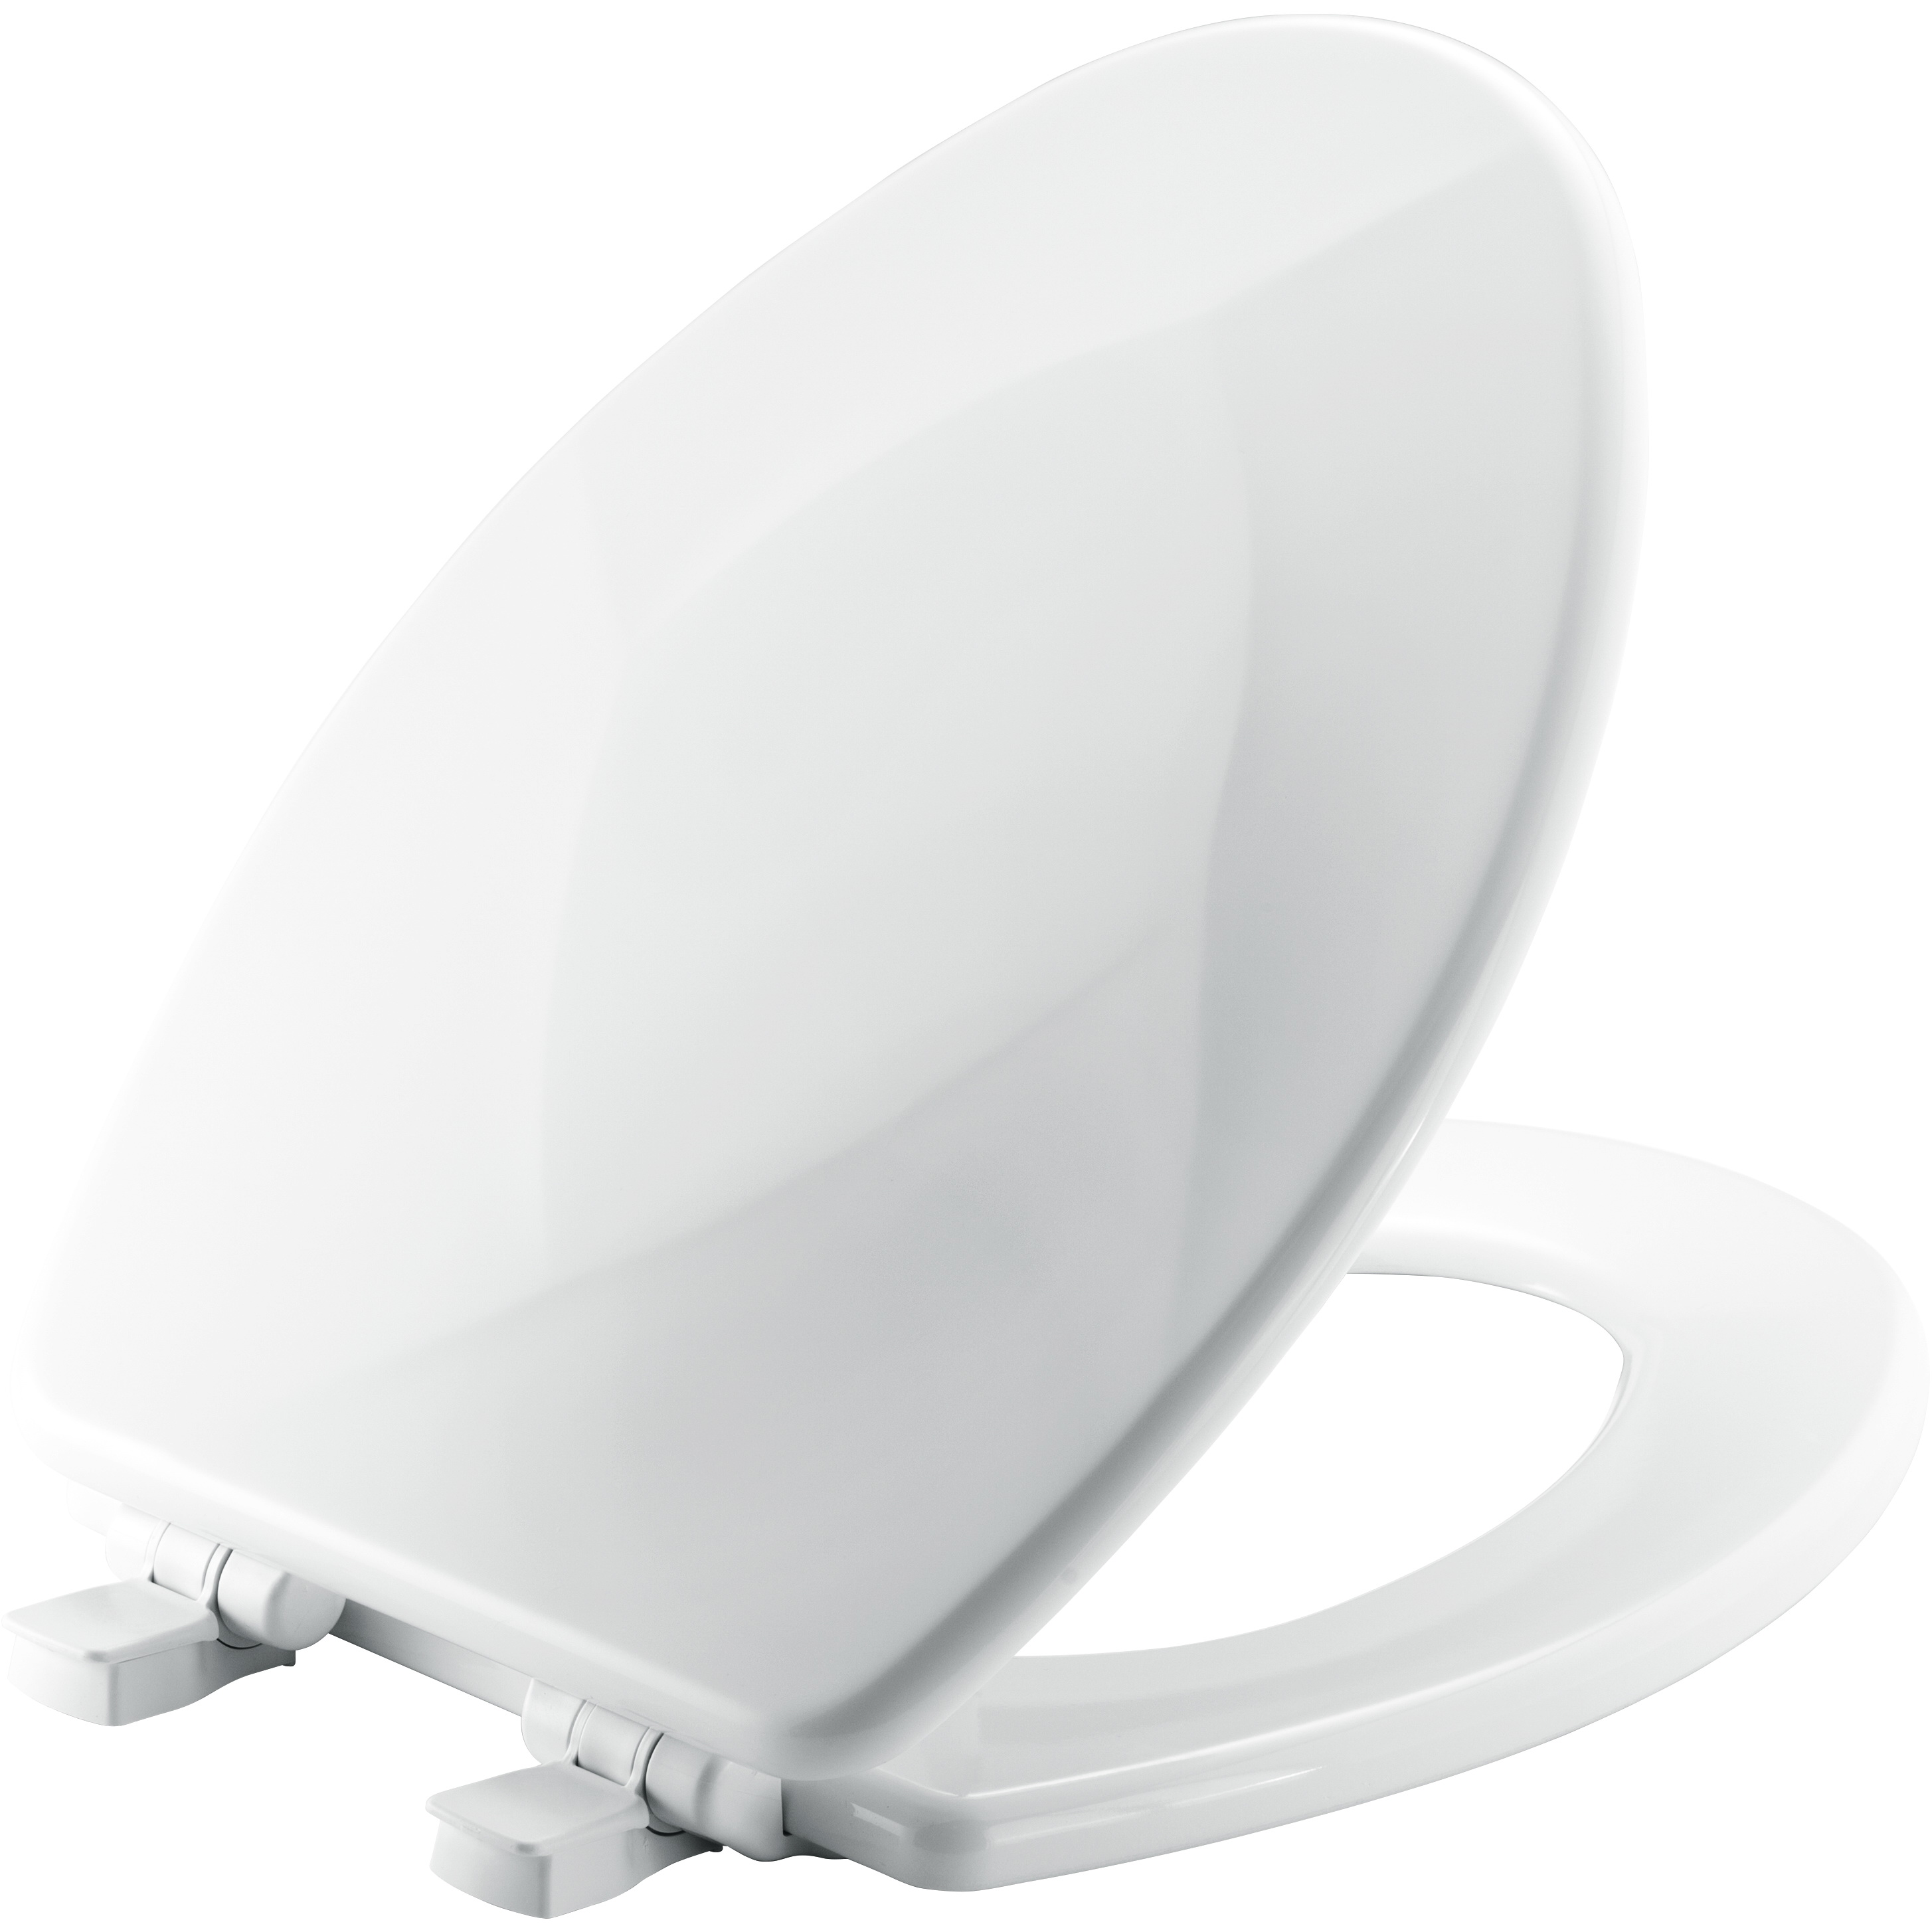 Mayfair 133SLOW 000 Toilet Seat, Elongated, Wood, White, Easy Clean and Change Hinge